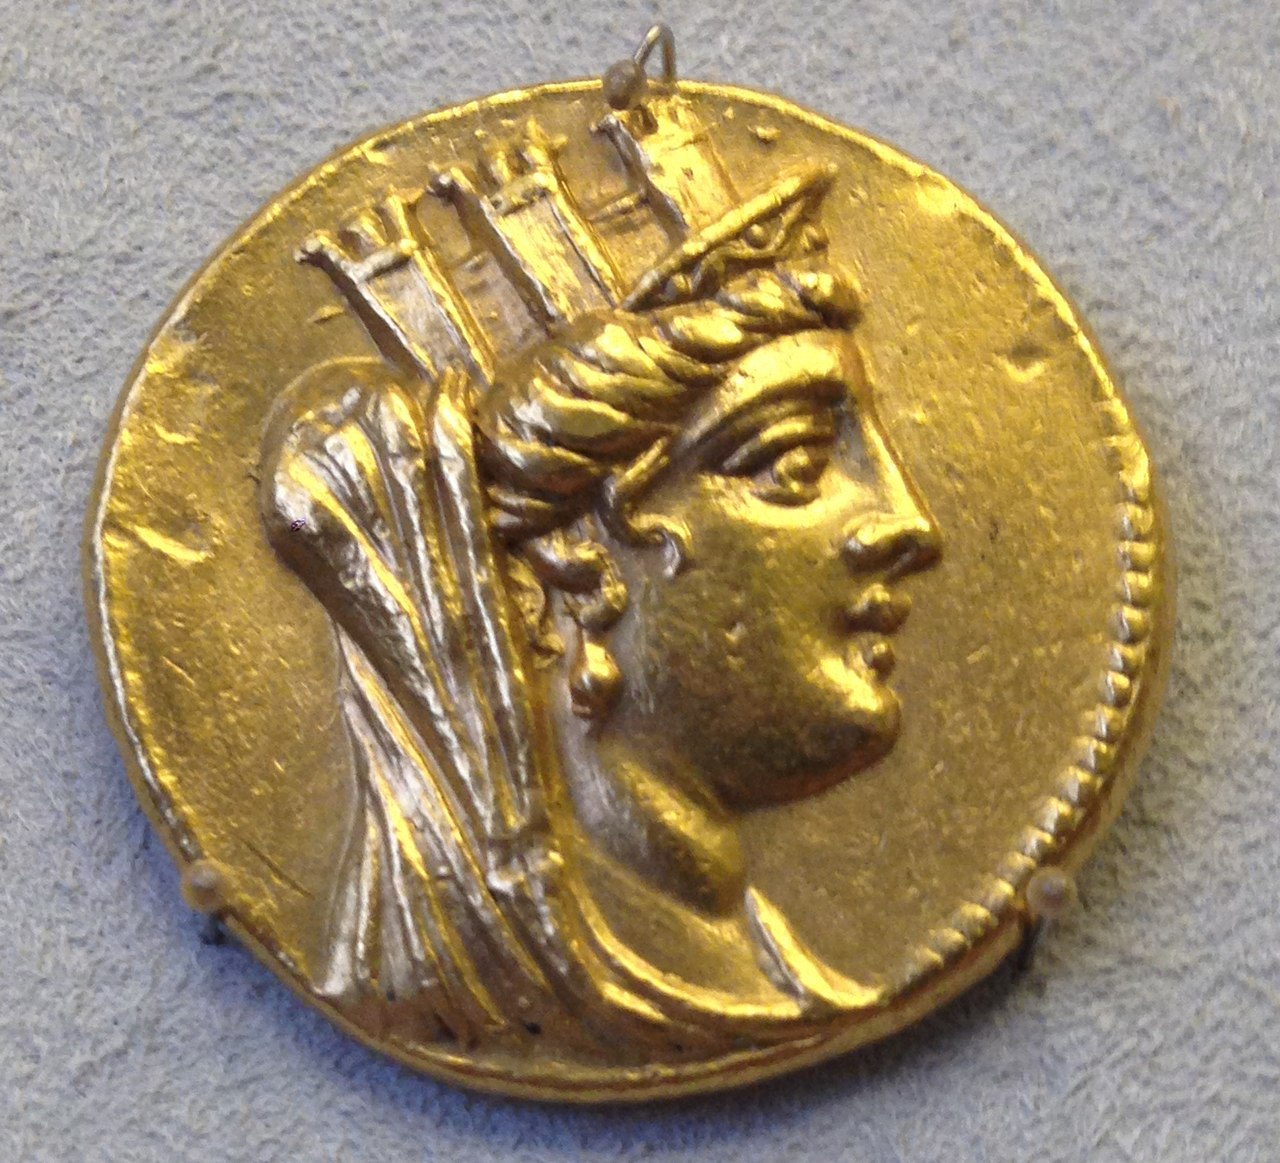 This particular item is a piece of currency fashioned from gold, and upon its surface is a depiction of the image of Tyche.